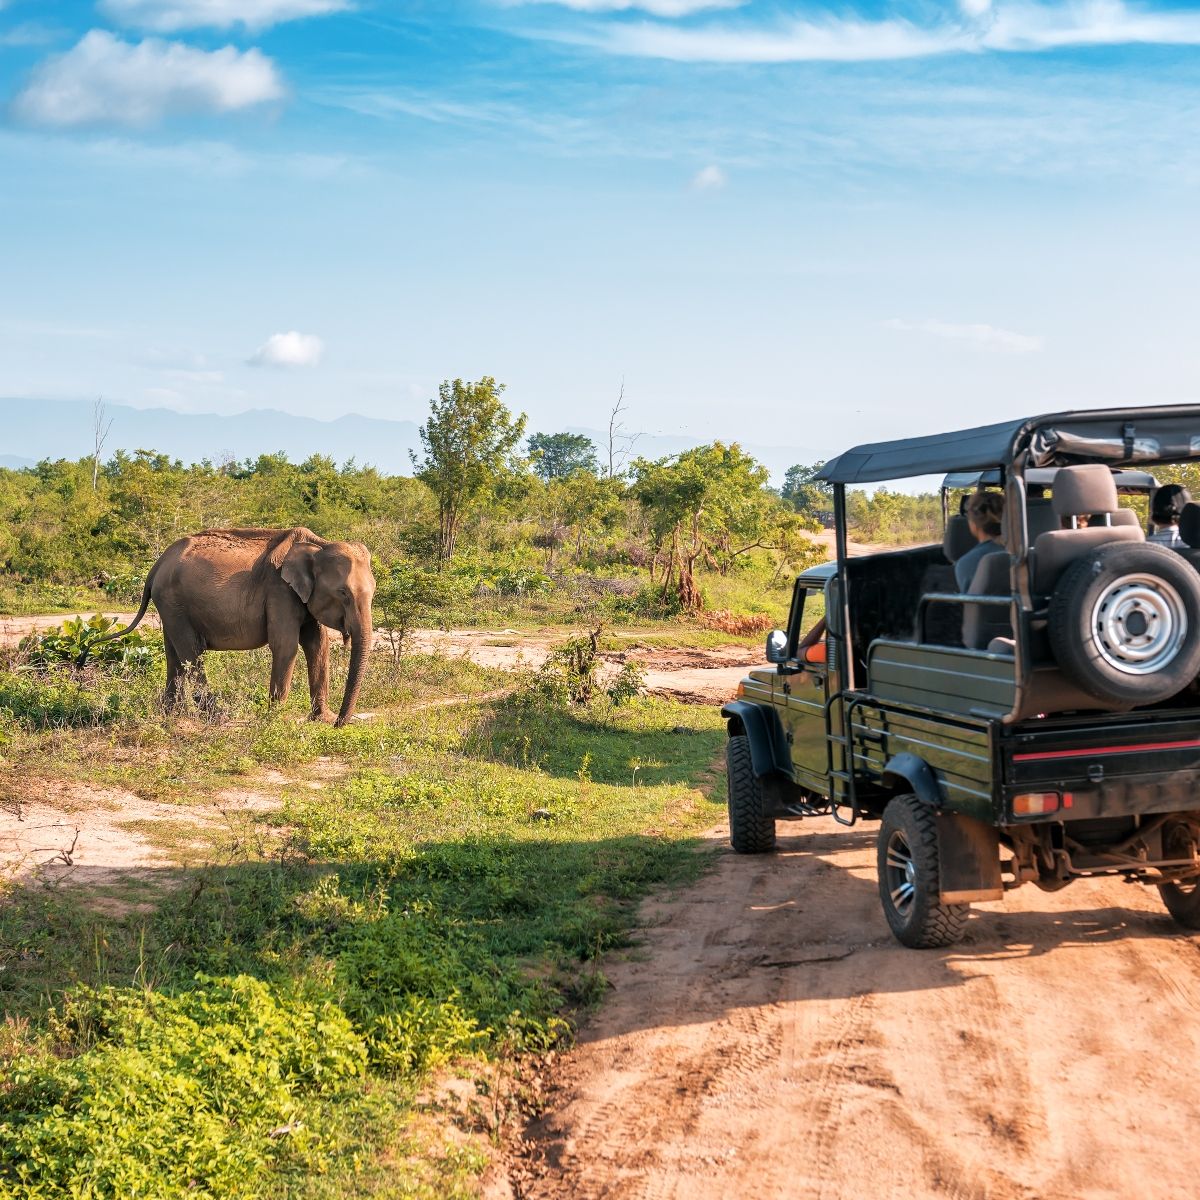 A group of people in an SUV spot an elephant while on safari.